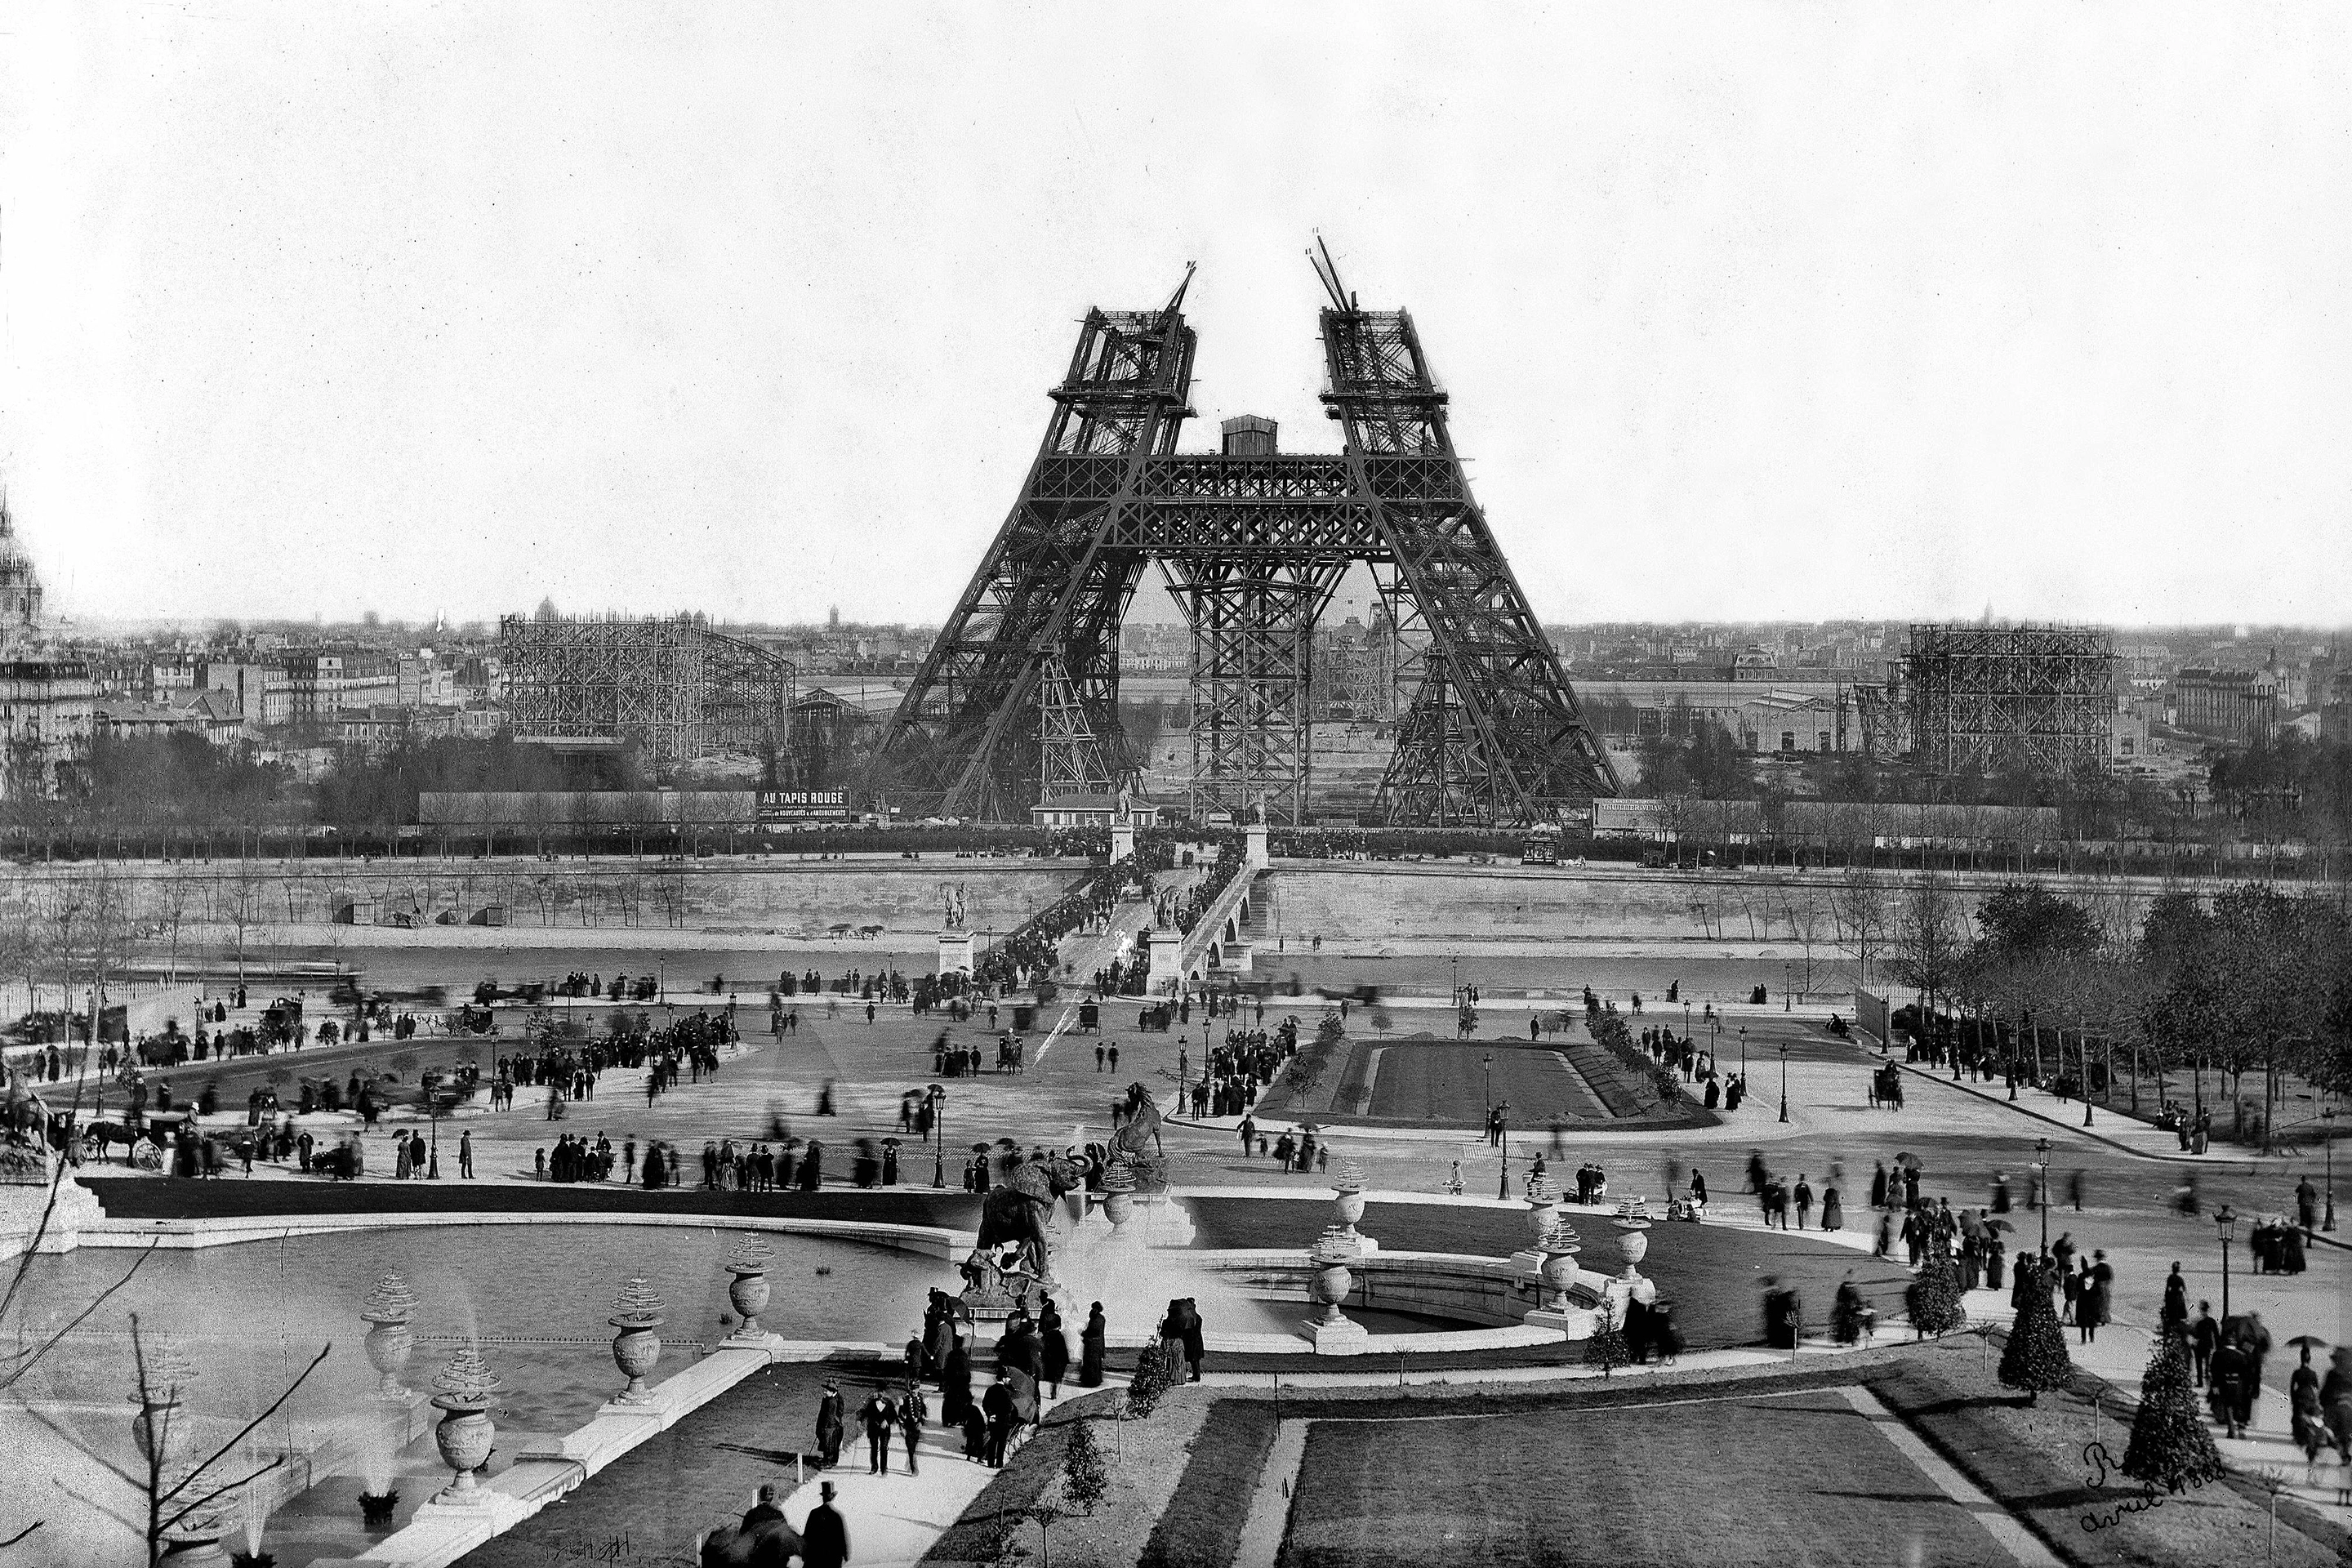 France: Eiffel Tower is reportedly badly in need of repairs